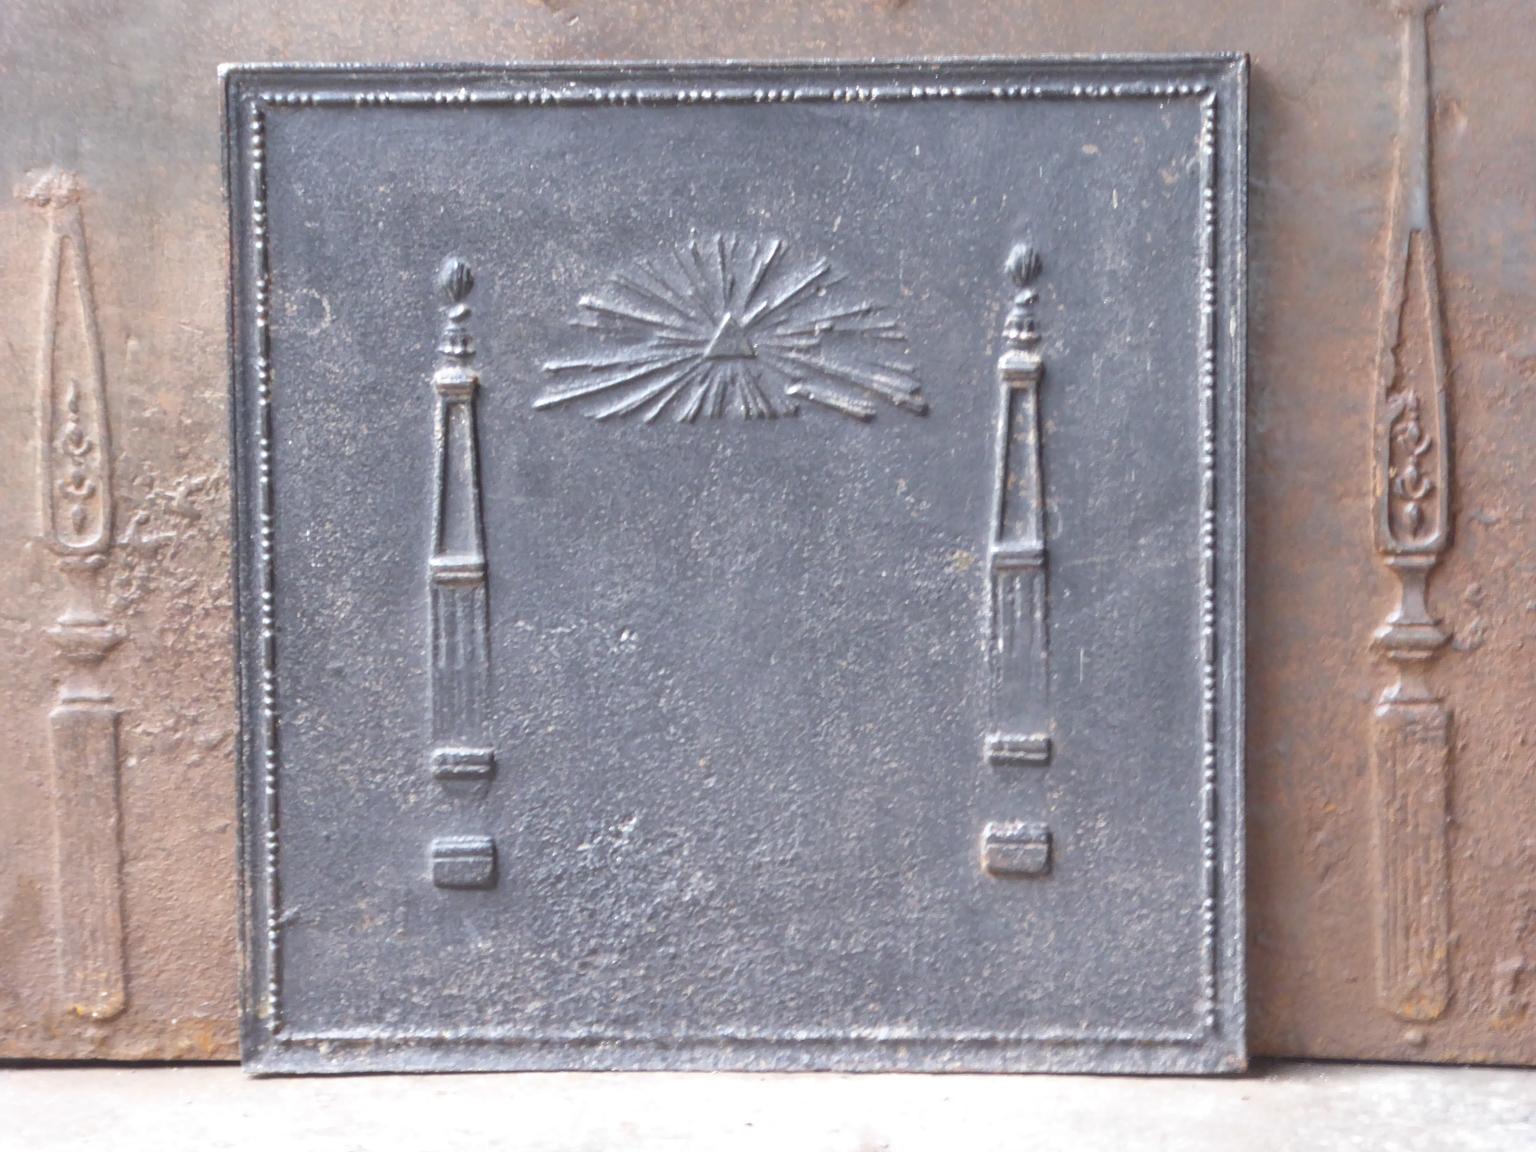 19th century French neoclassical fireback with two pillars of freedom and the masonic eye of providence symbol. The pillars symbolize the value liberty, one of the three values of the French revolution. 

The fireback is made of cast iron and has